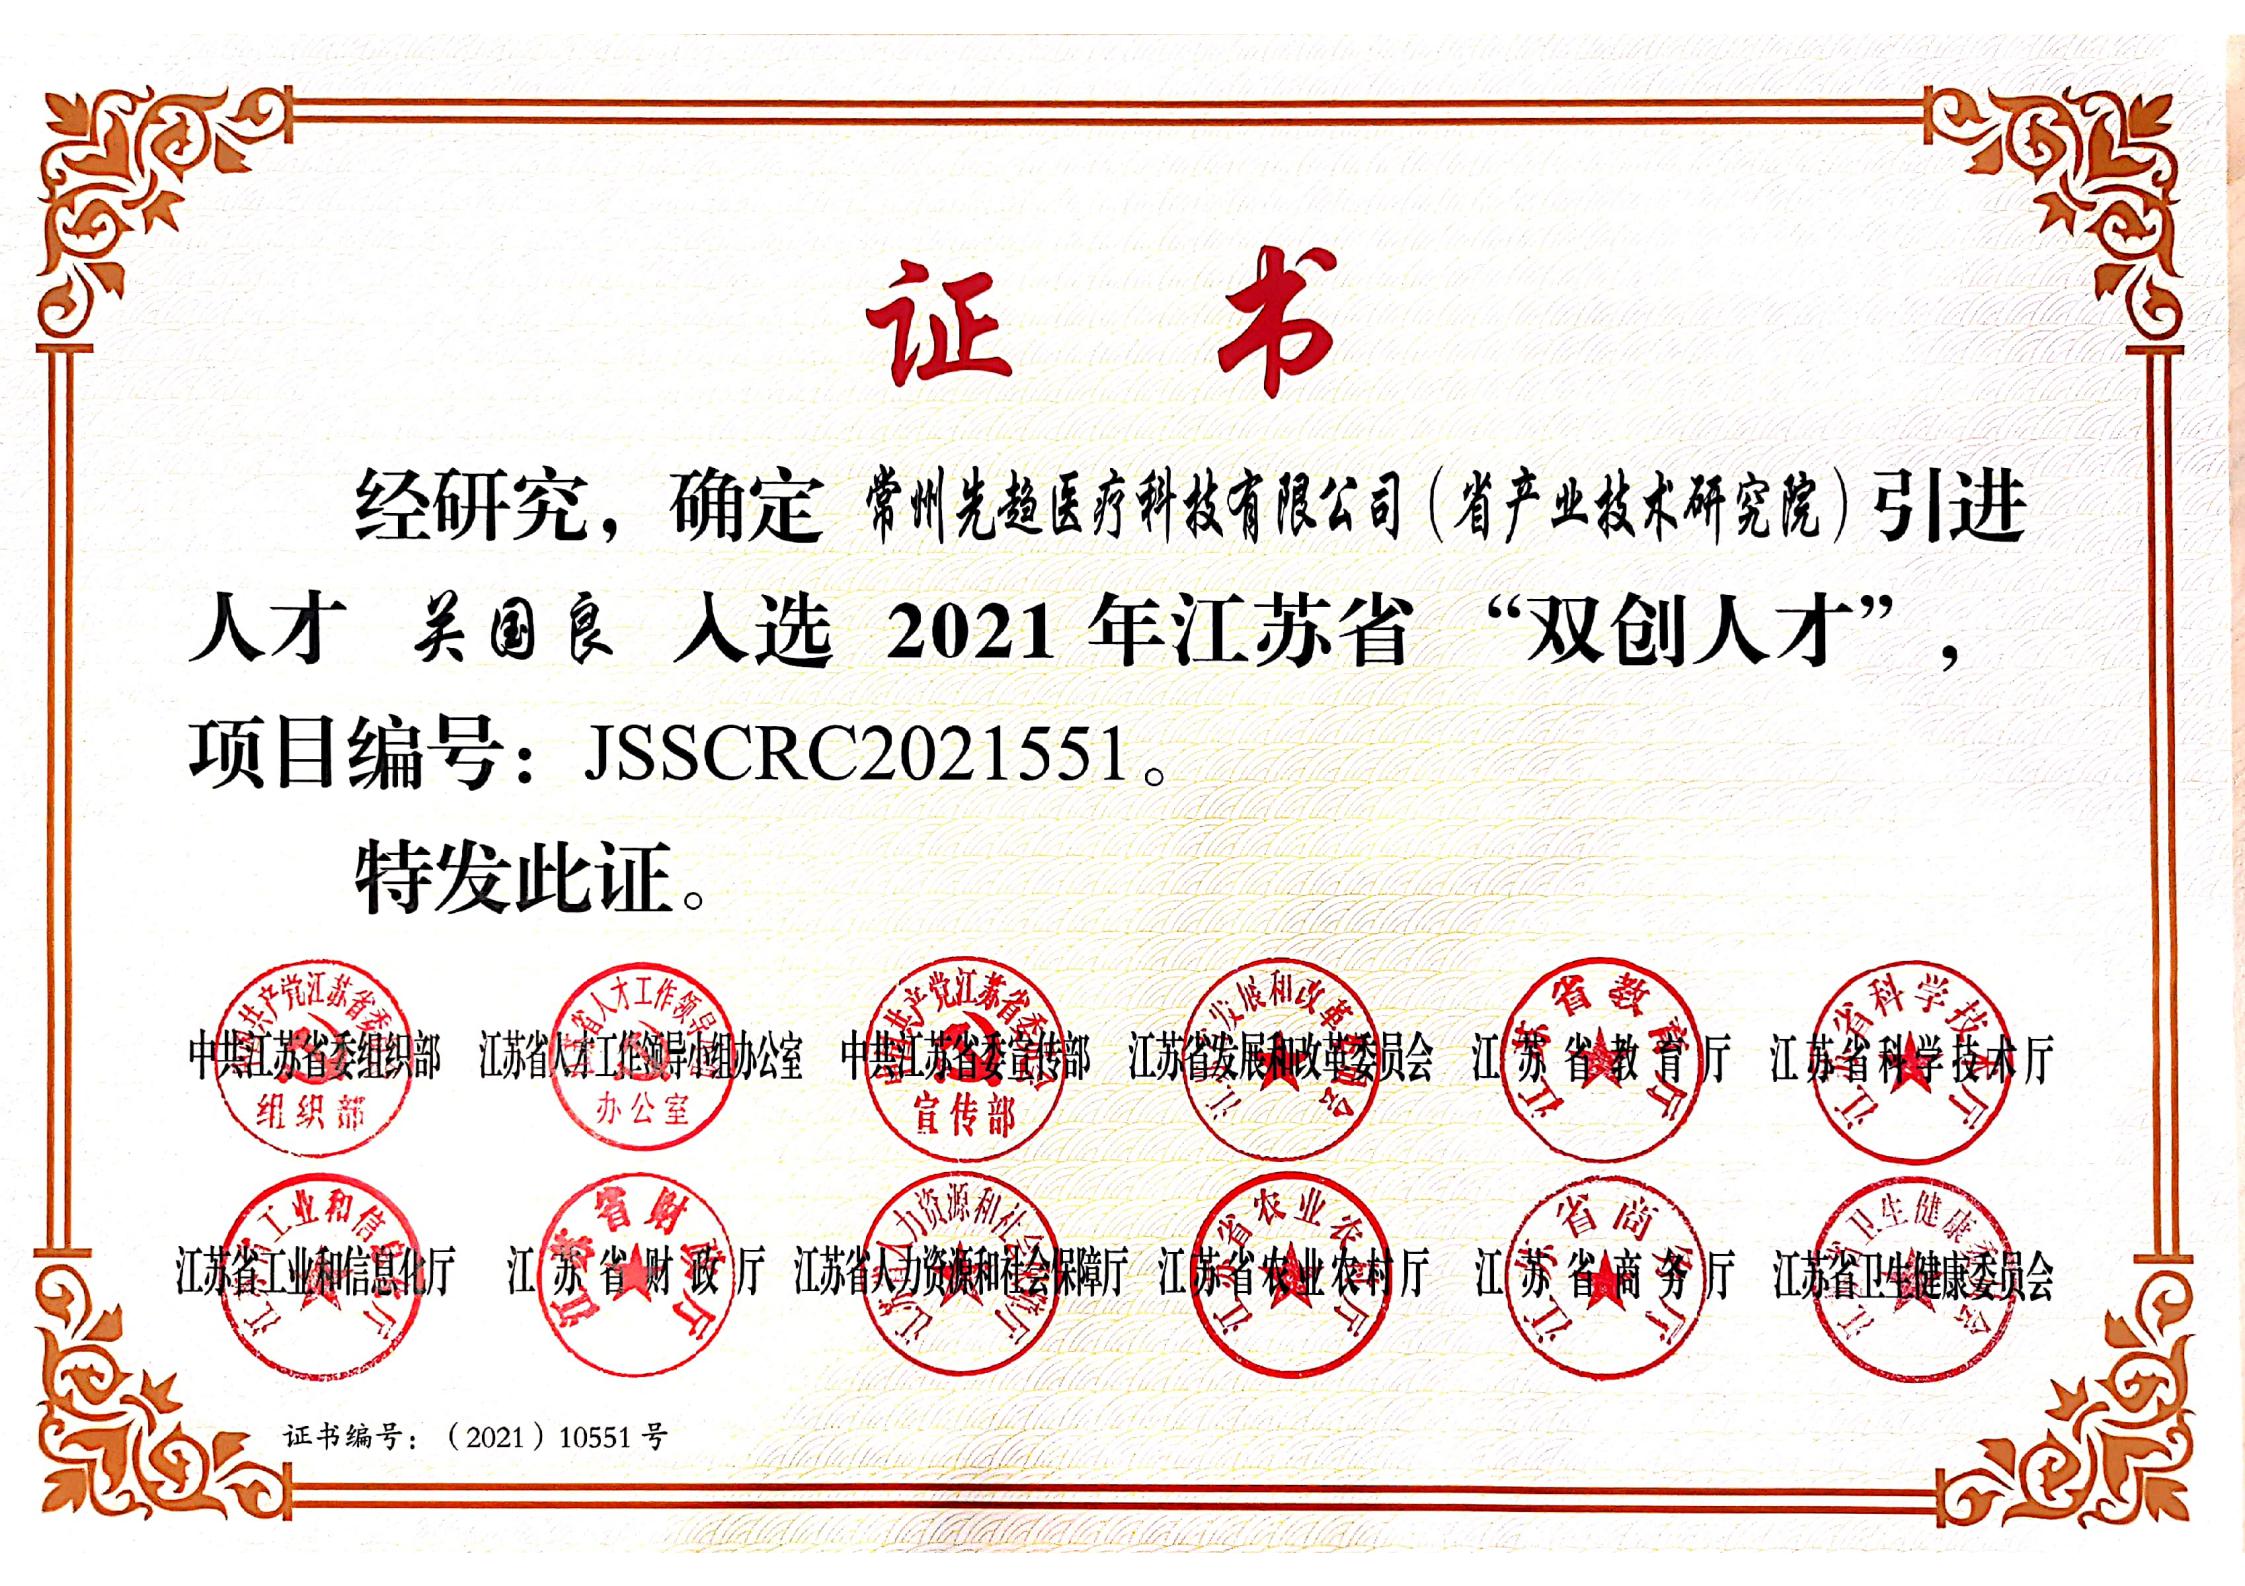 Selected in the 2021 Jiangsu High-level Innovative and Entrepreneurial Talent Introduction Program(图1)